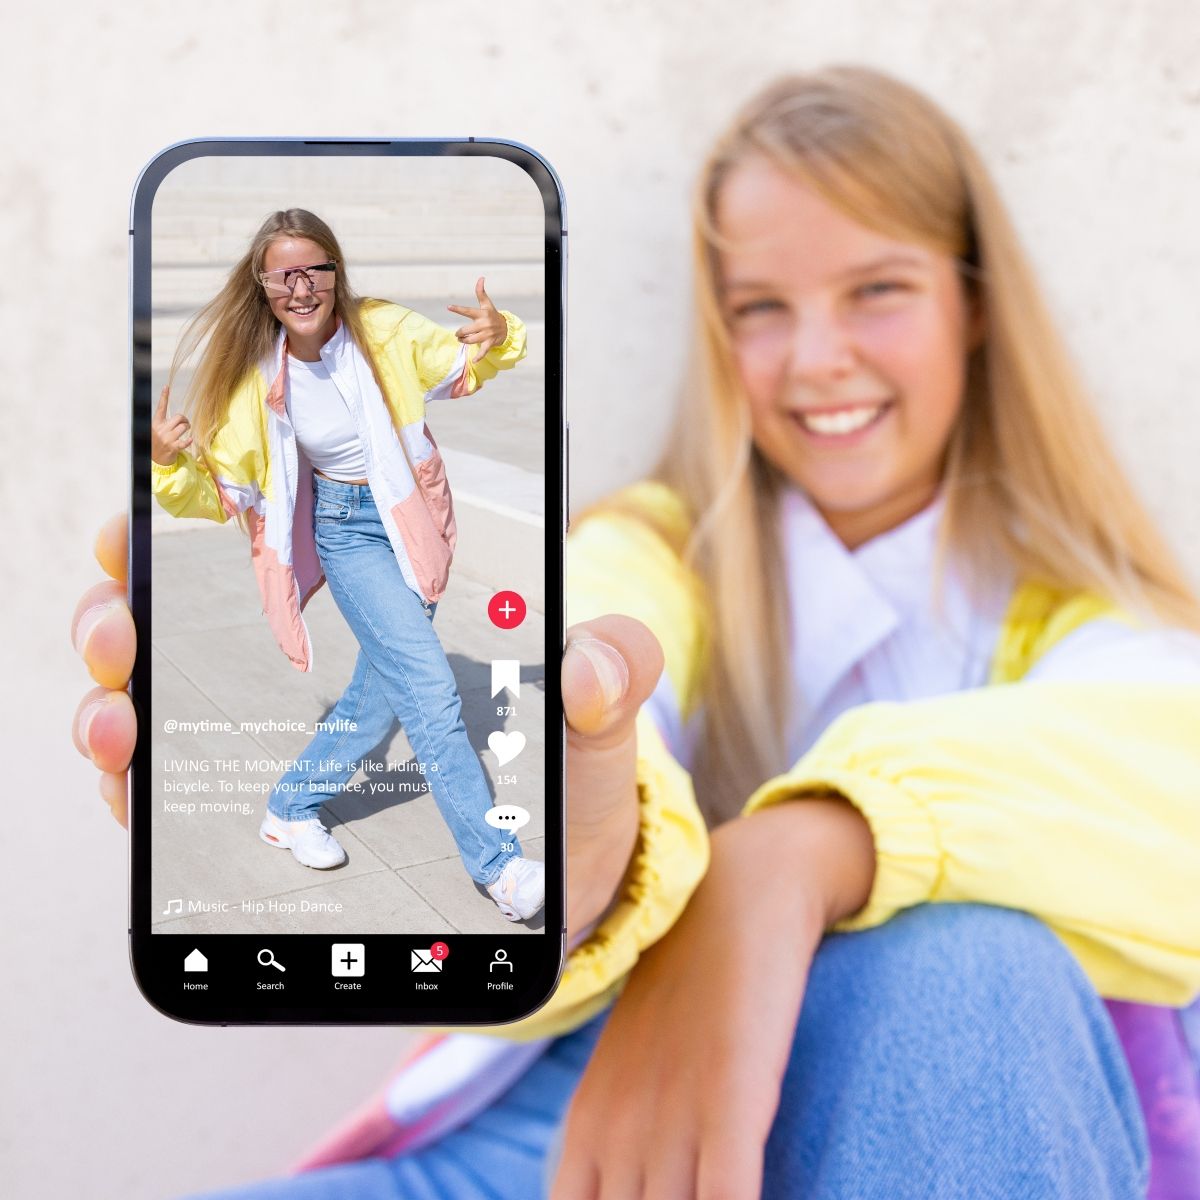 Blond young girl showing phone with her on tiktok video 